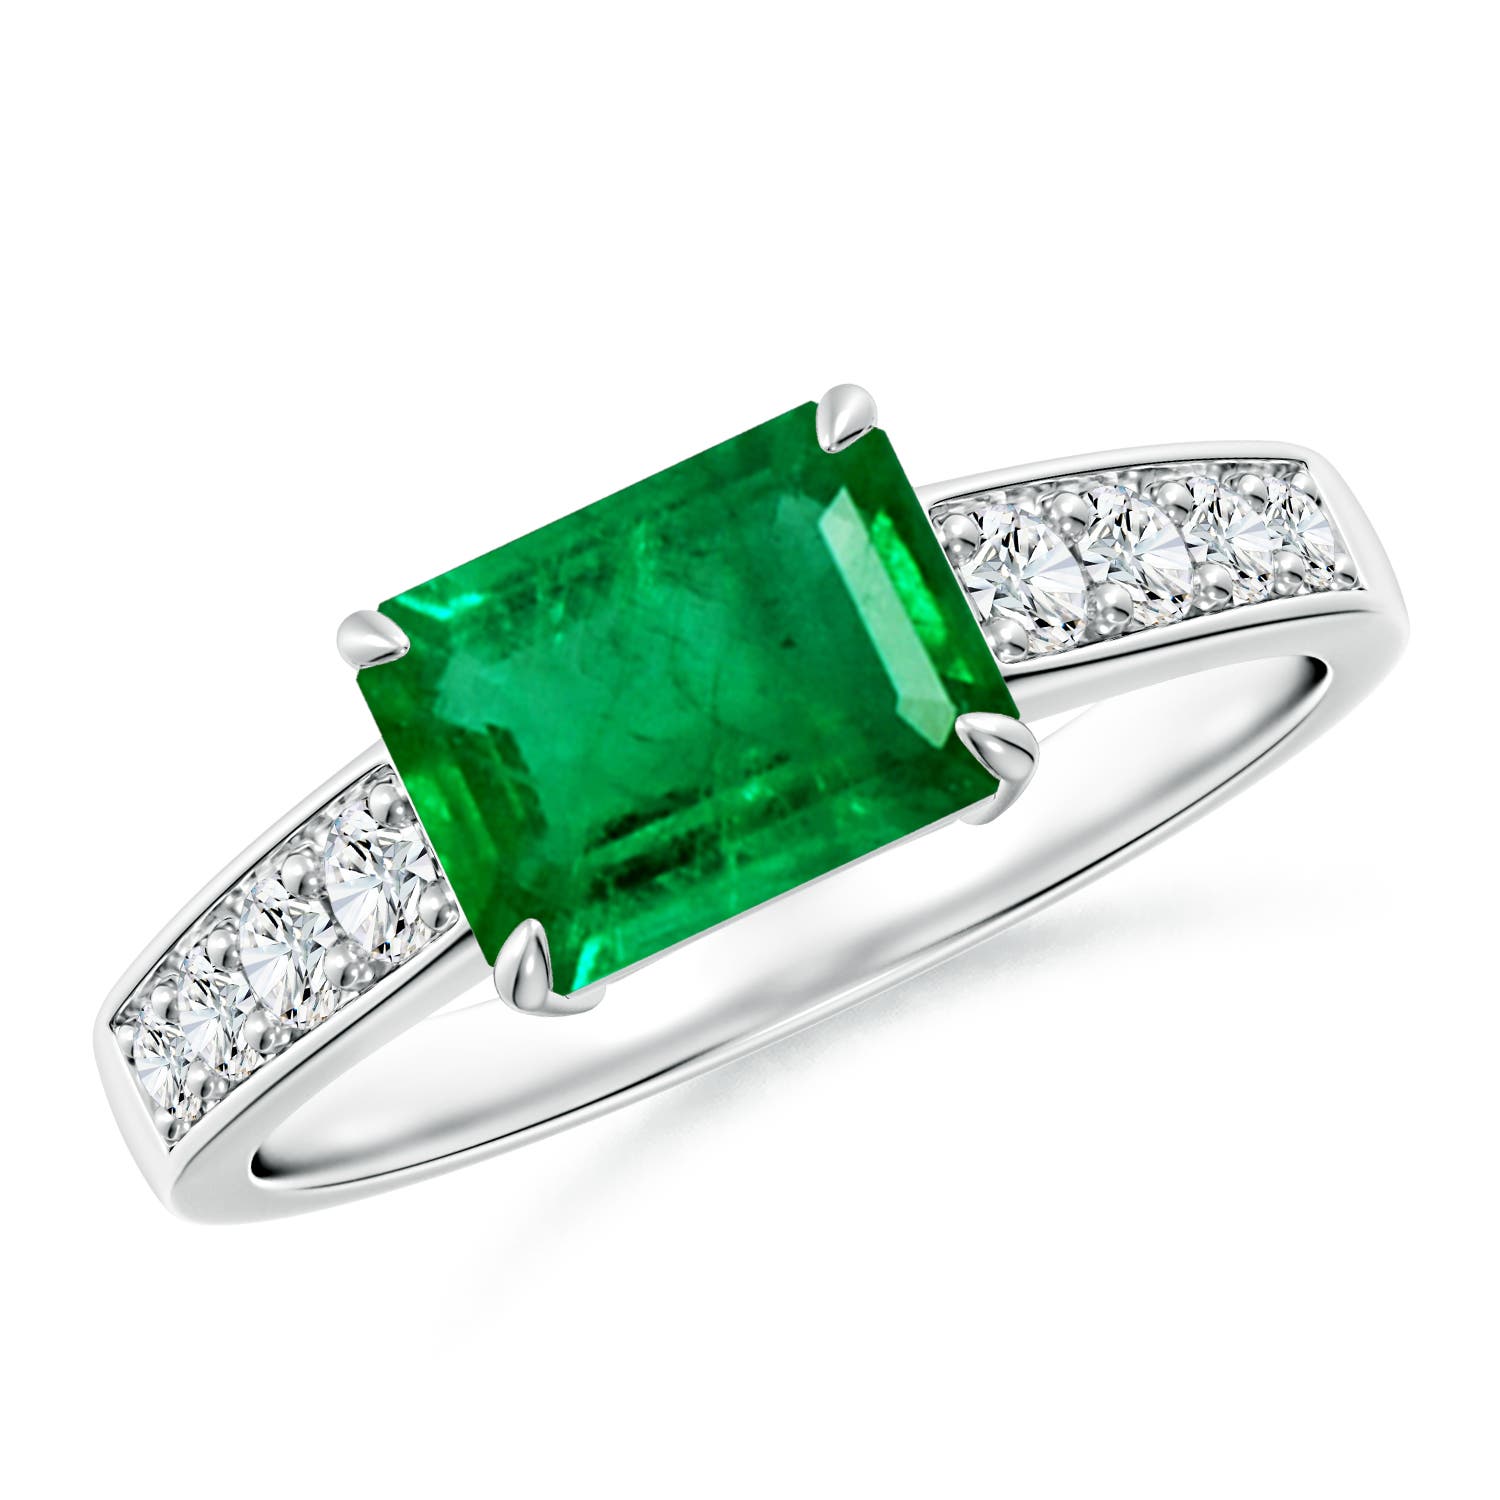 AAA - Emerald / 1.82 CT / 14 KT White Gold